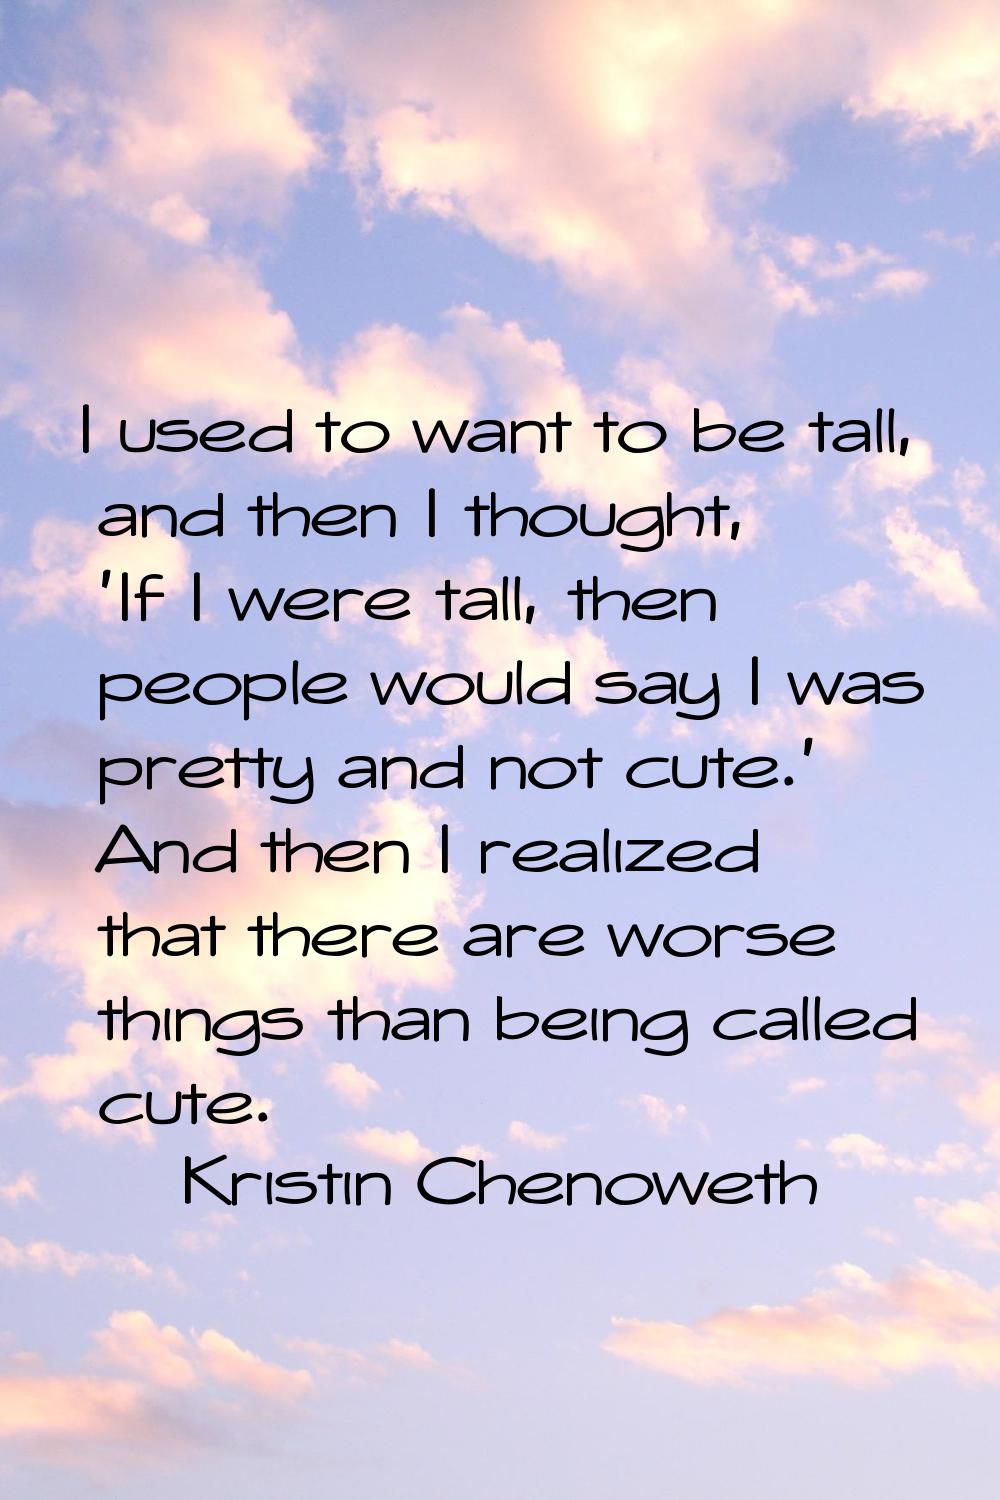 I used to want to be tall, and then I thought, 'If I were tall, then people would say I was pretty 